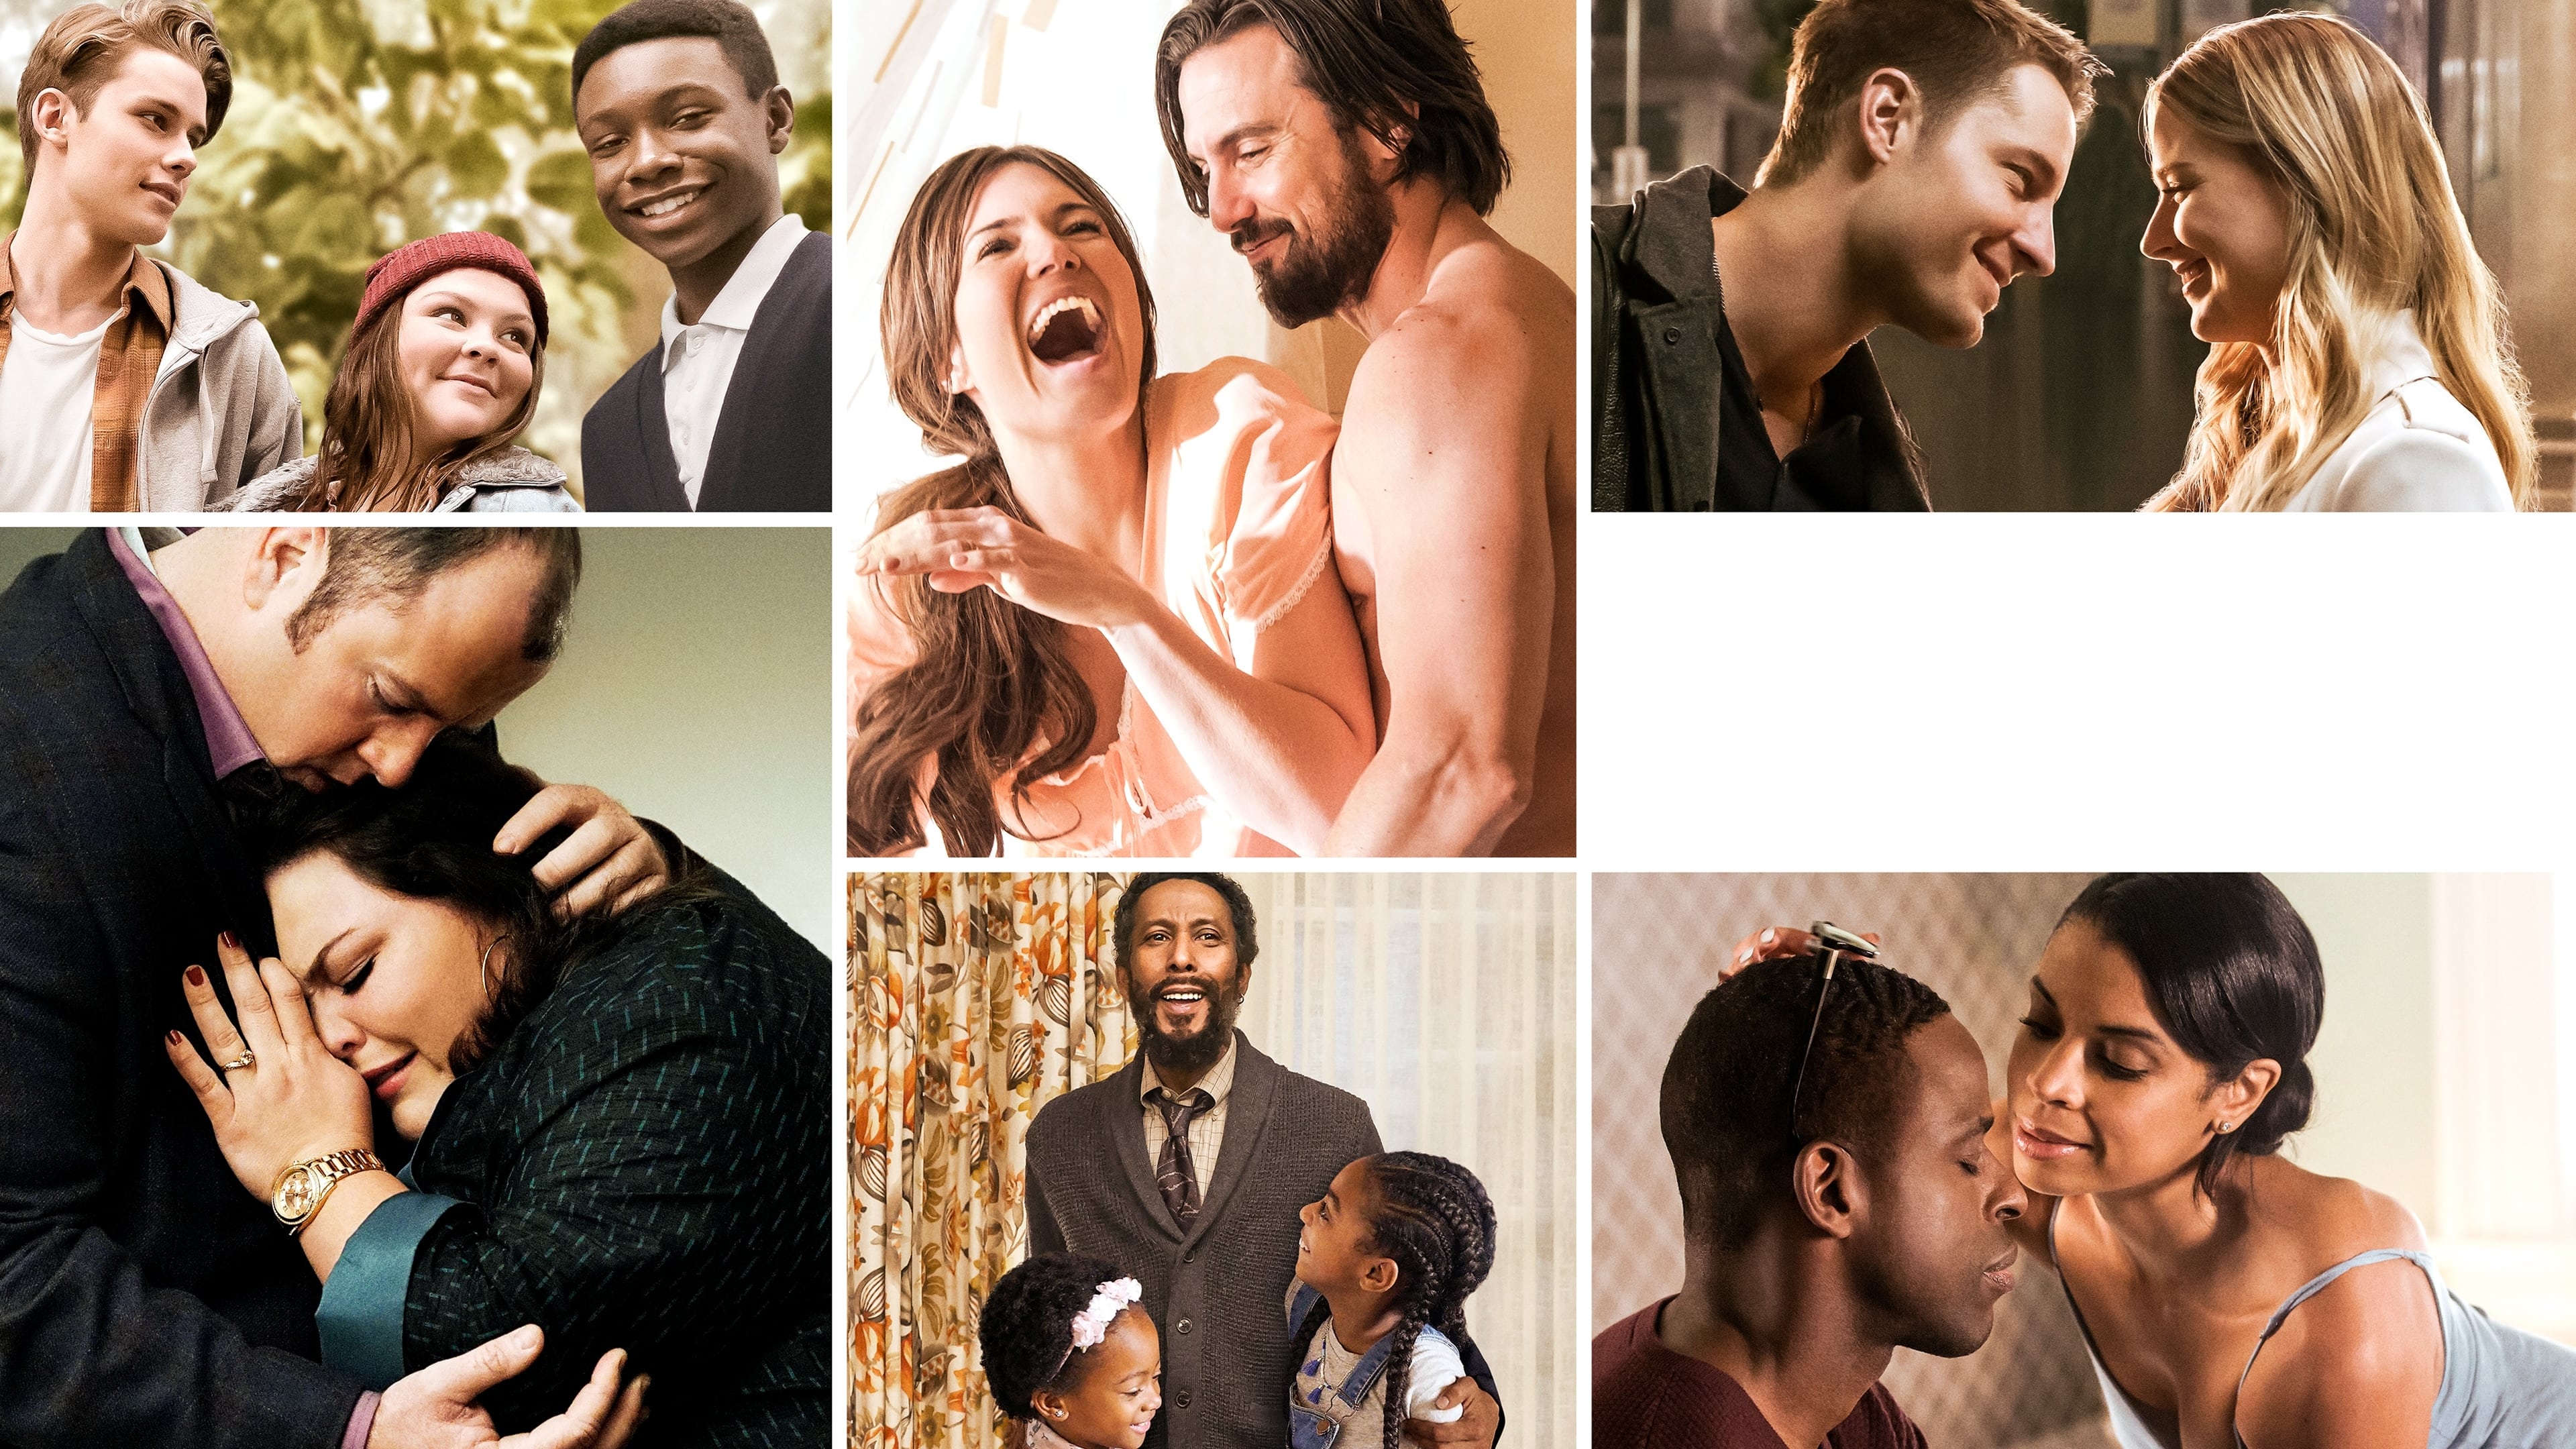 This Is Us - Season 6 Episode 11